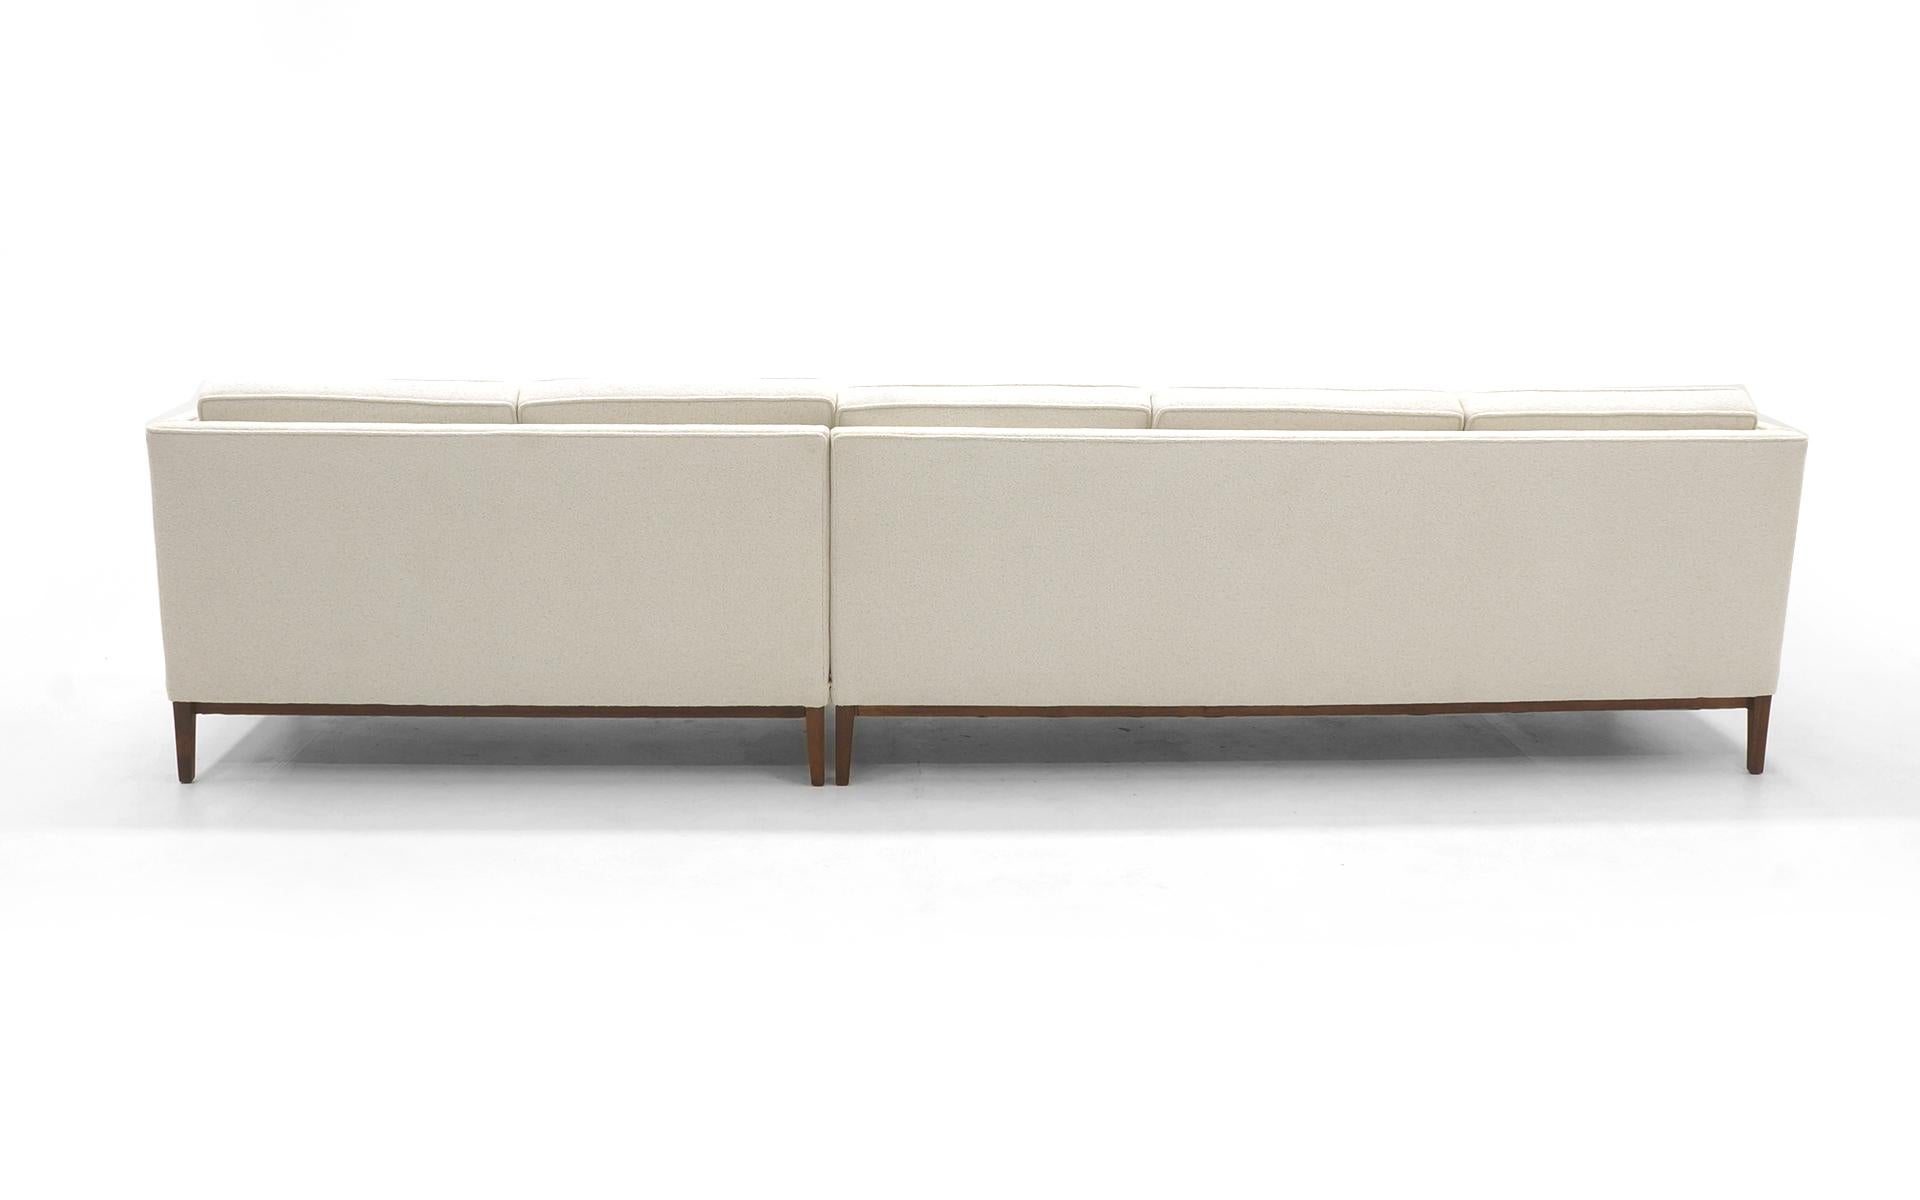 20th Century Sectional Sofa, Five-Seat, Two-Piece, Even Arm, off White, Restored, Excellent For Sale